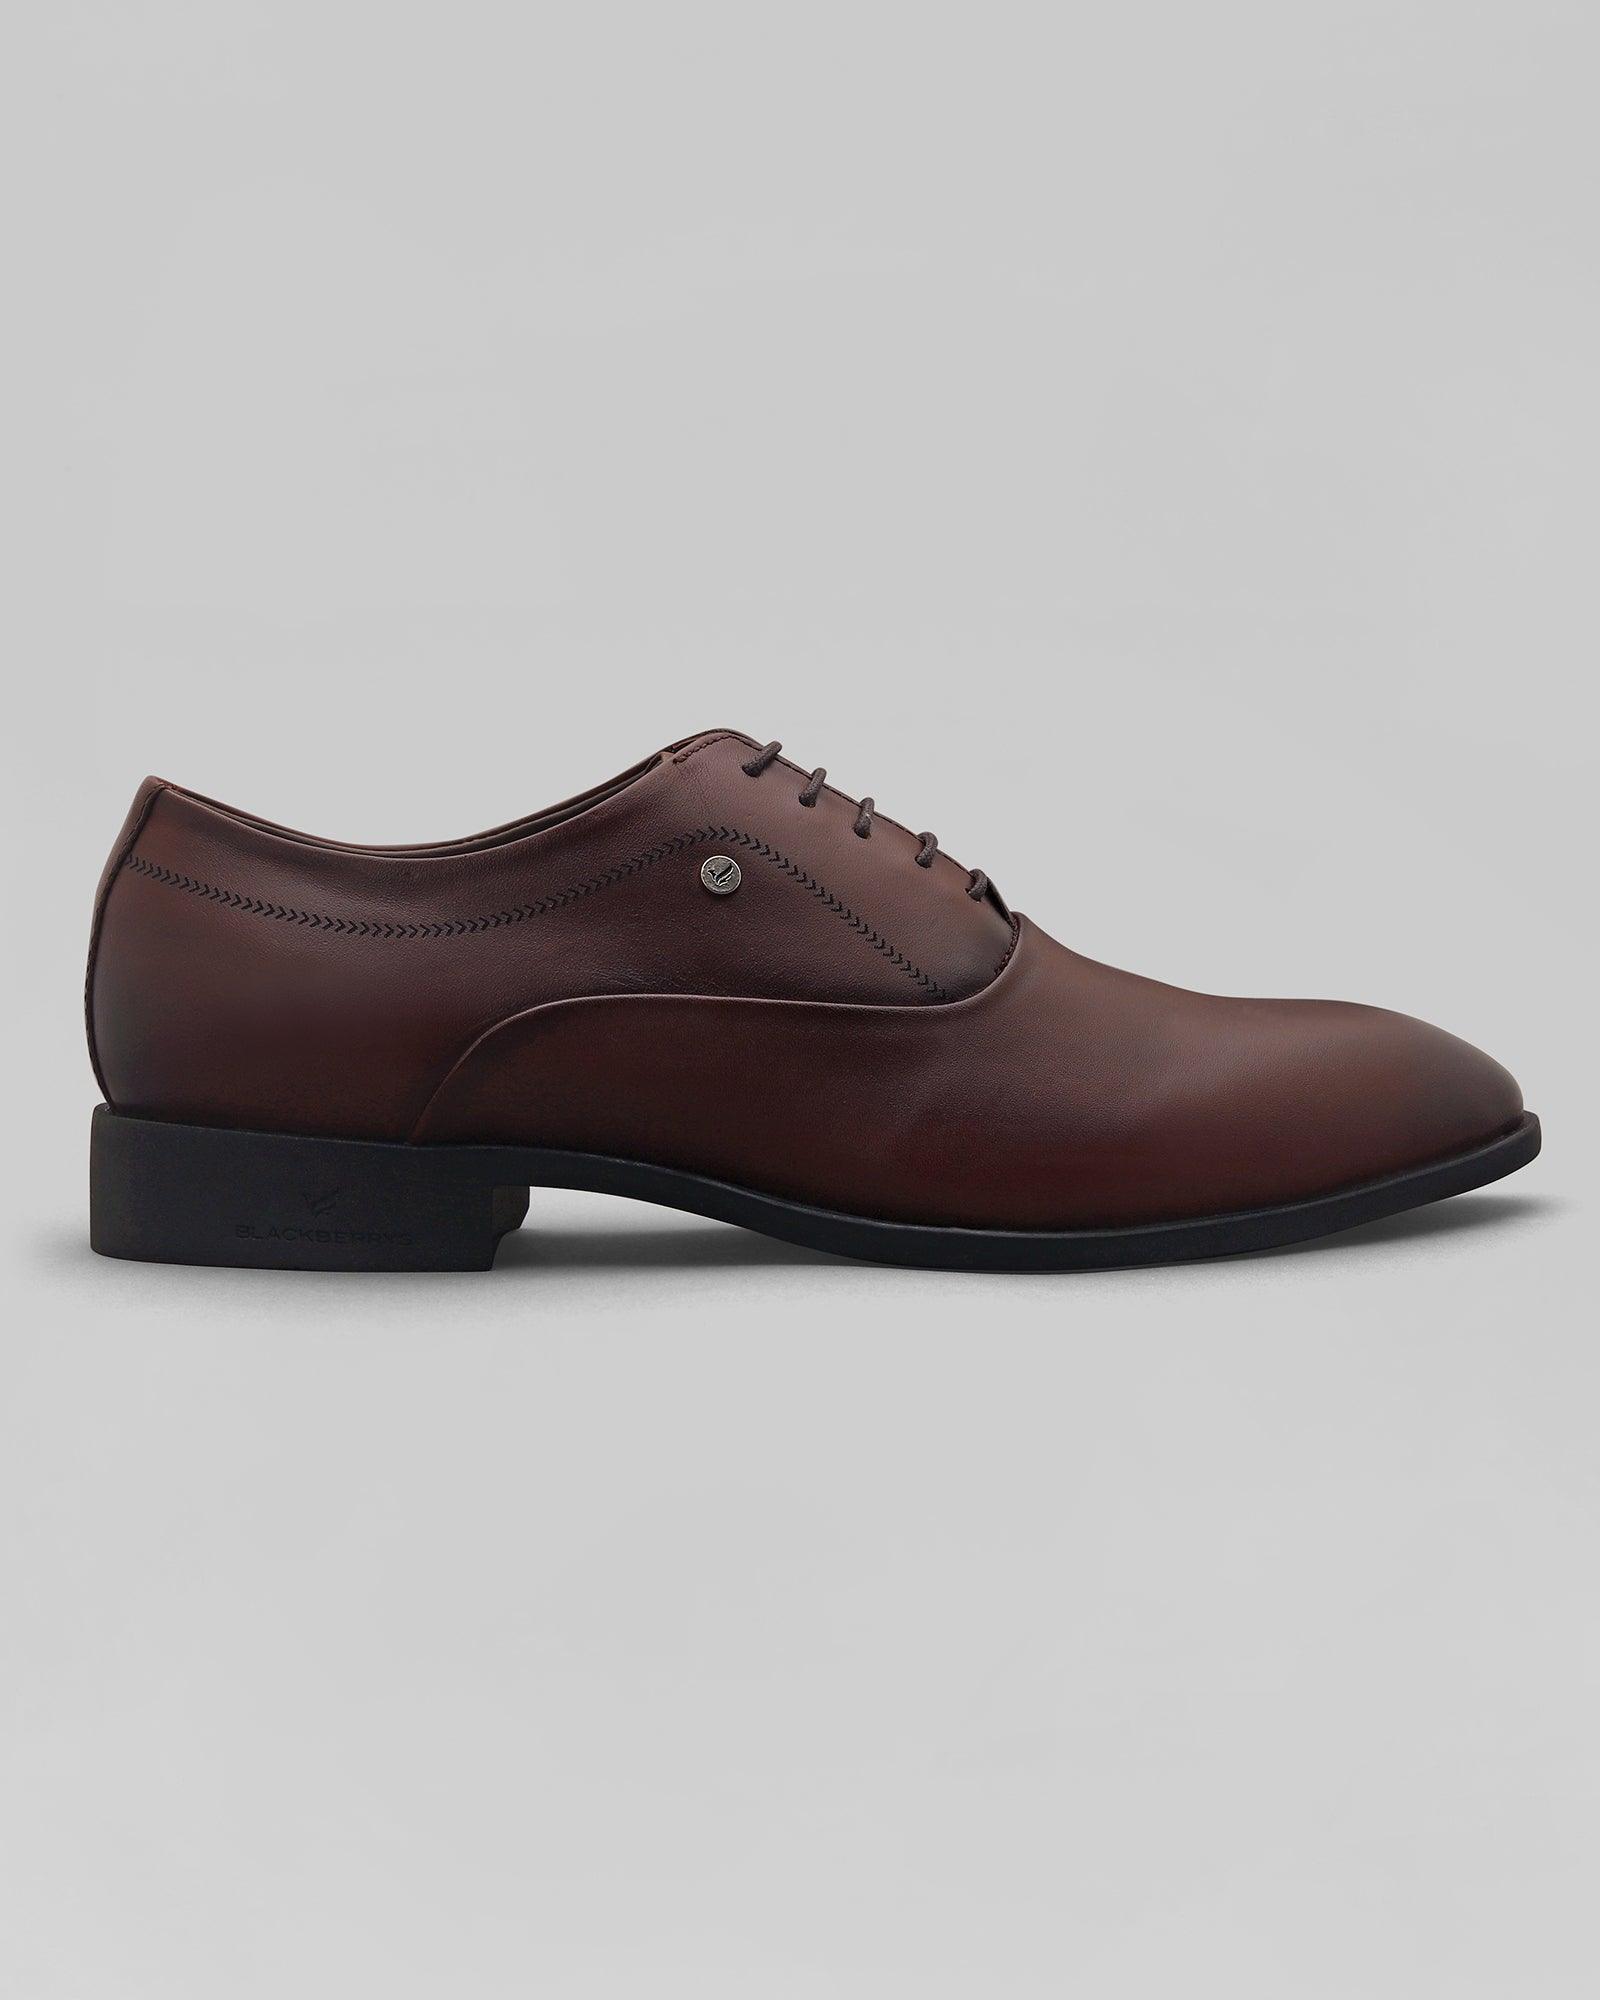 Must Haves Leather Burgandy Solid Oxford Shoes - Lebum